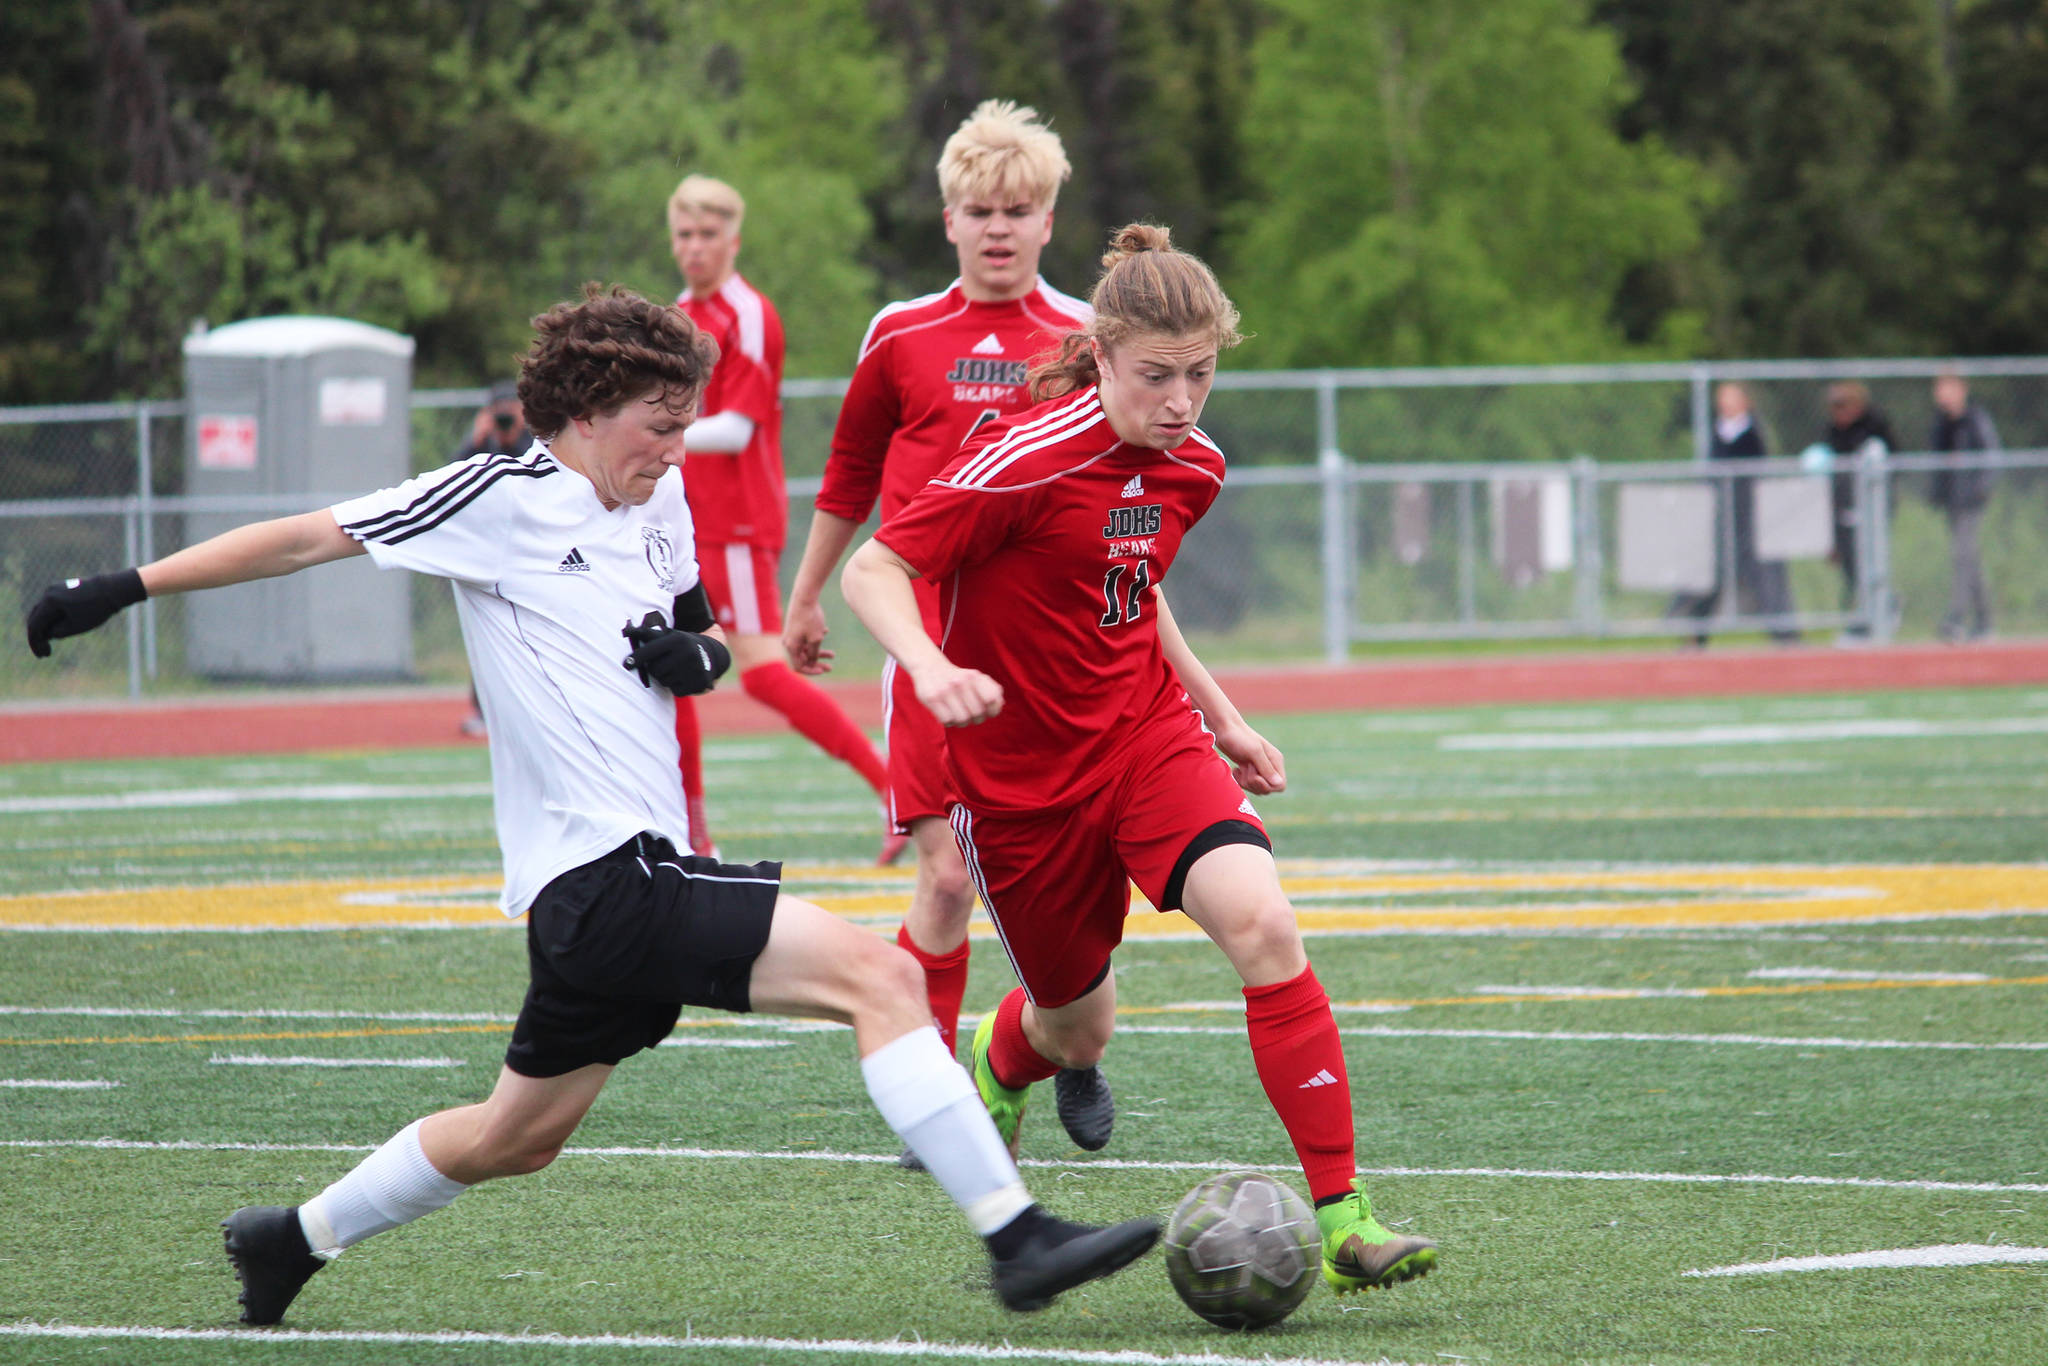 Kenai’s Damien Redder (left) fights for the ball with Juneau’s Jackson Norberg during the championship game of the Division II state soccer tournament Saturday at Service High School in Anchorage. (Photo by Megan Pacer/Homer News)